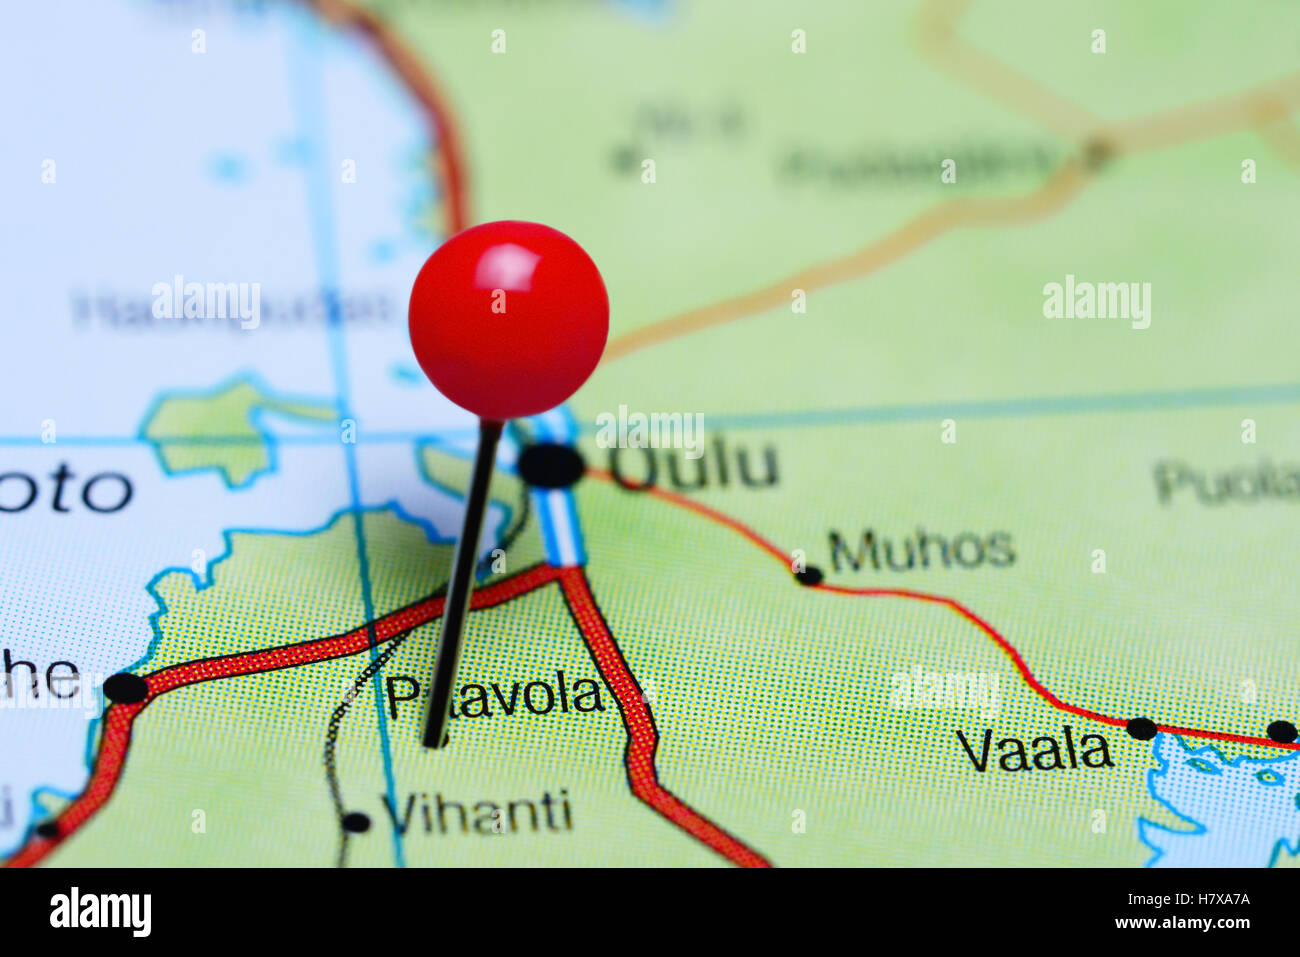 Paavola pinned on a map of Finland Stock Photo